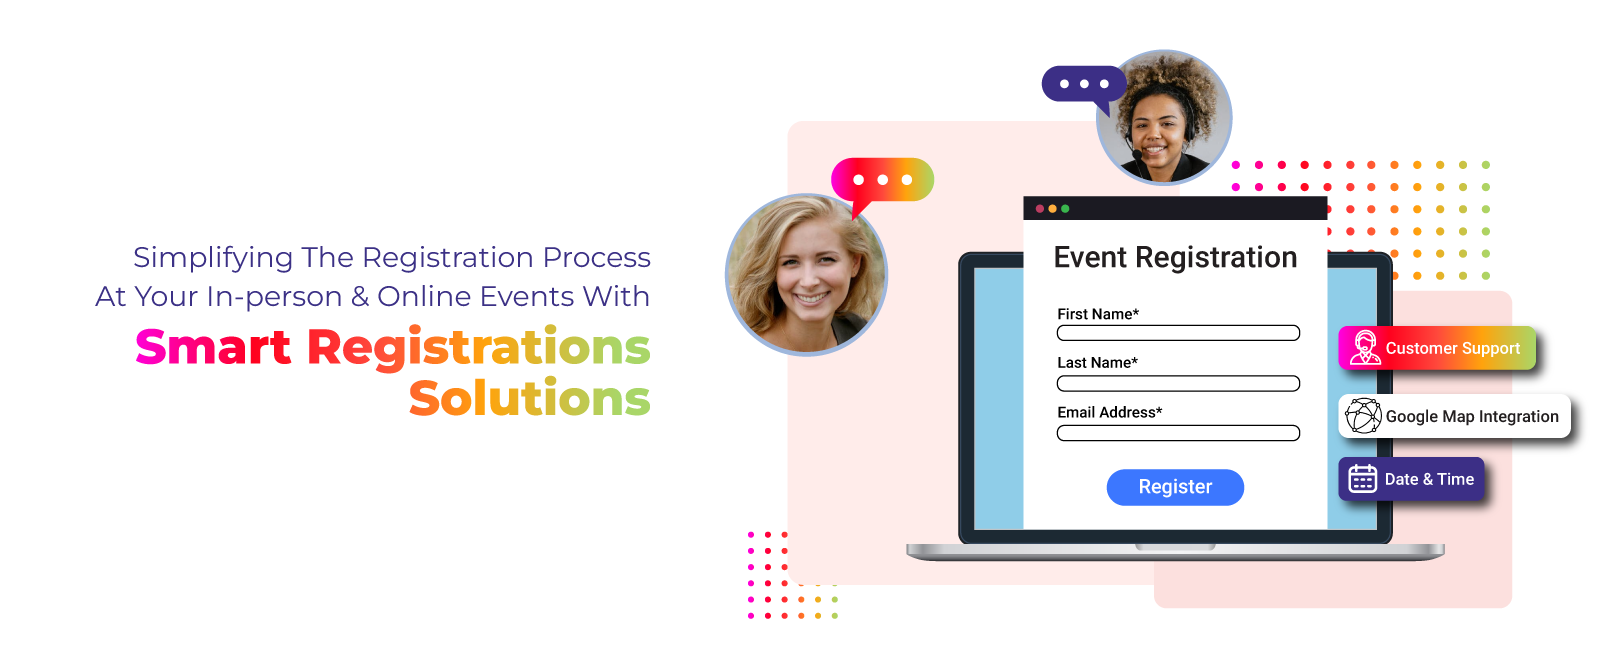 Simplifying the Registration Process at Your In-Person & Online Events with Smart Registrations Solutions